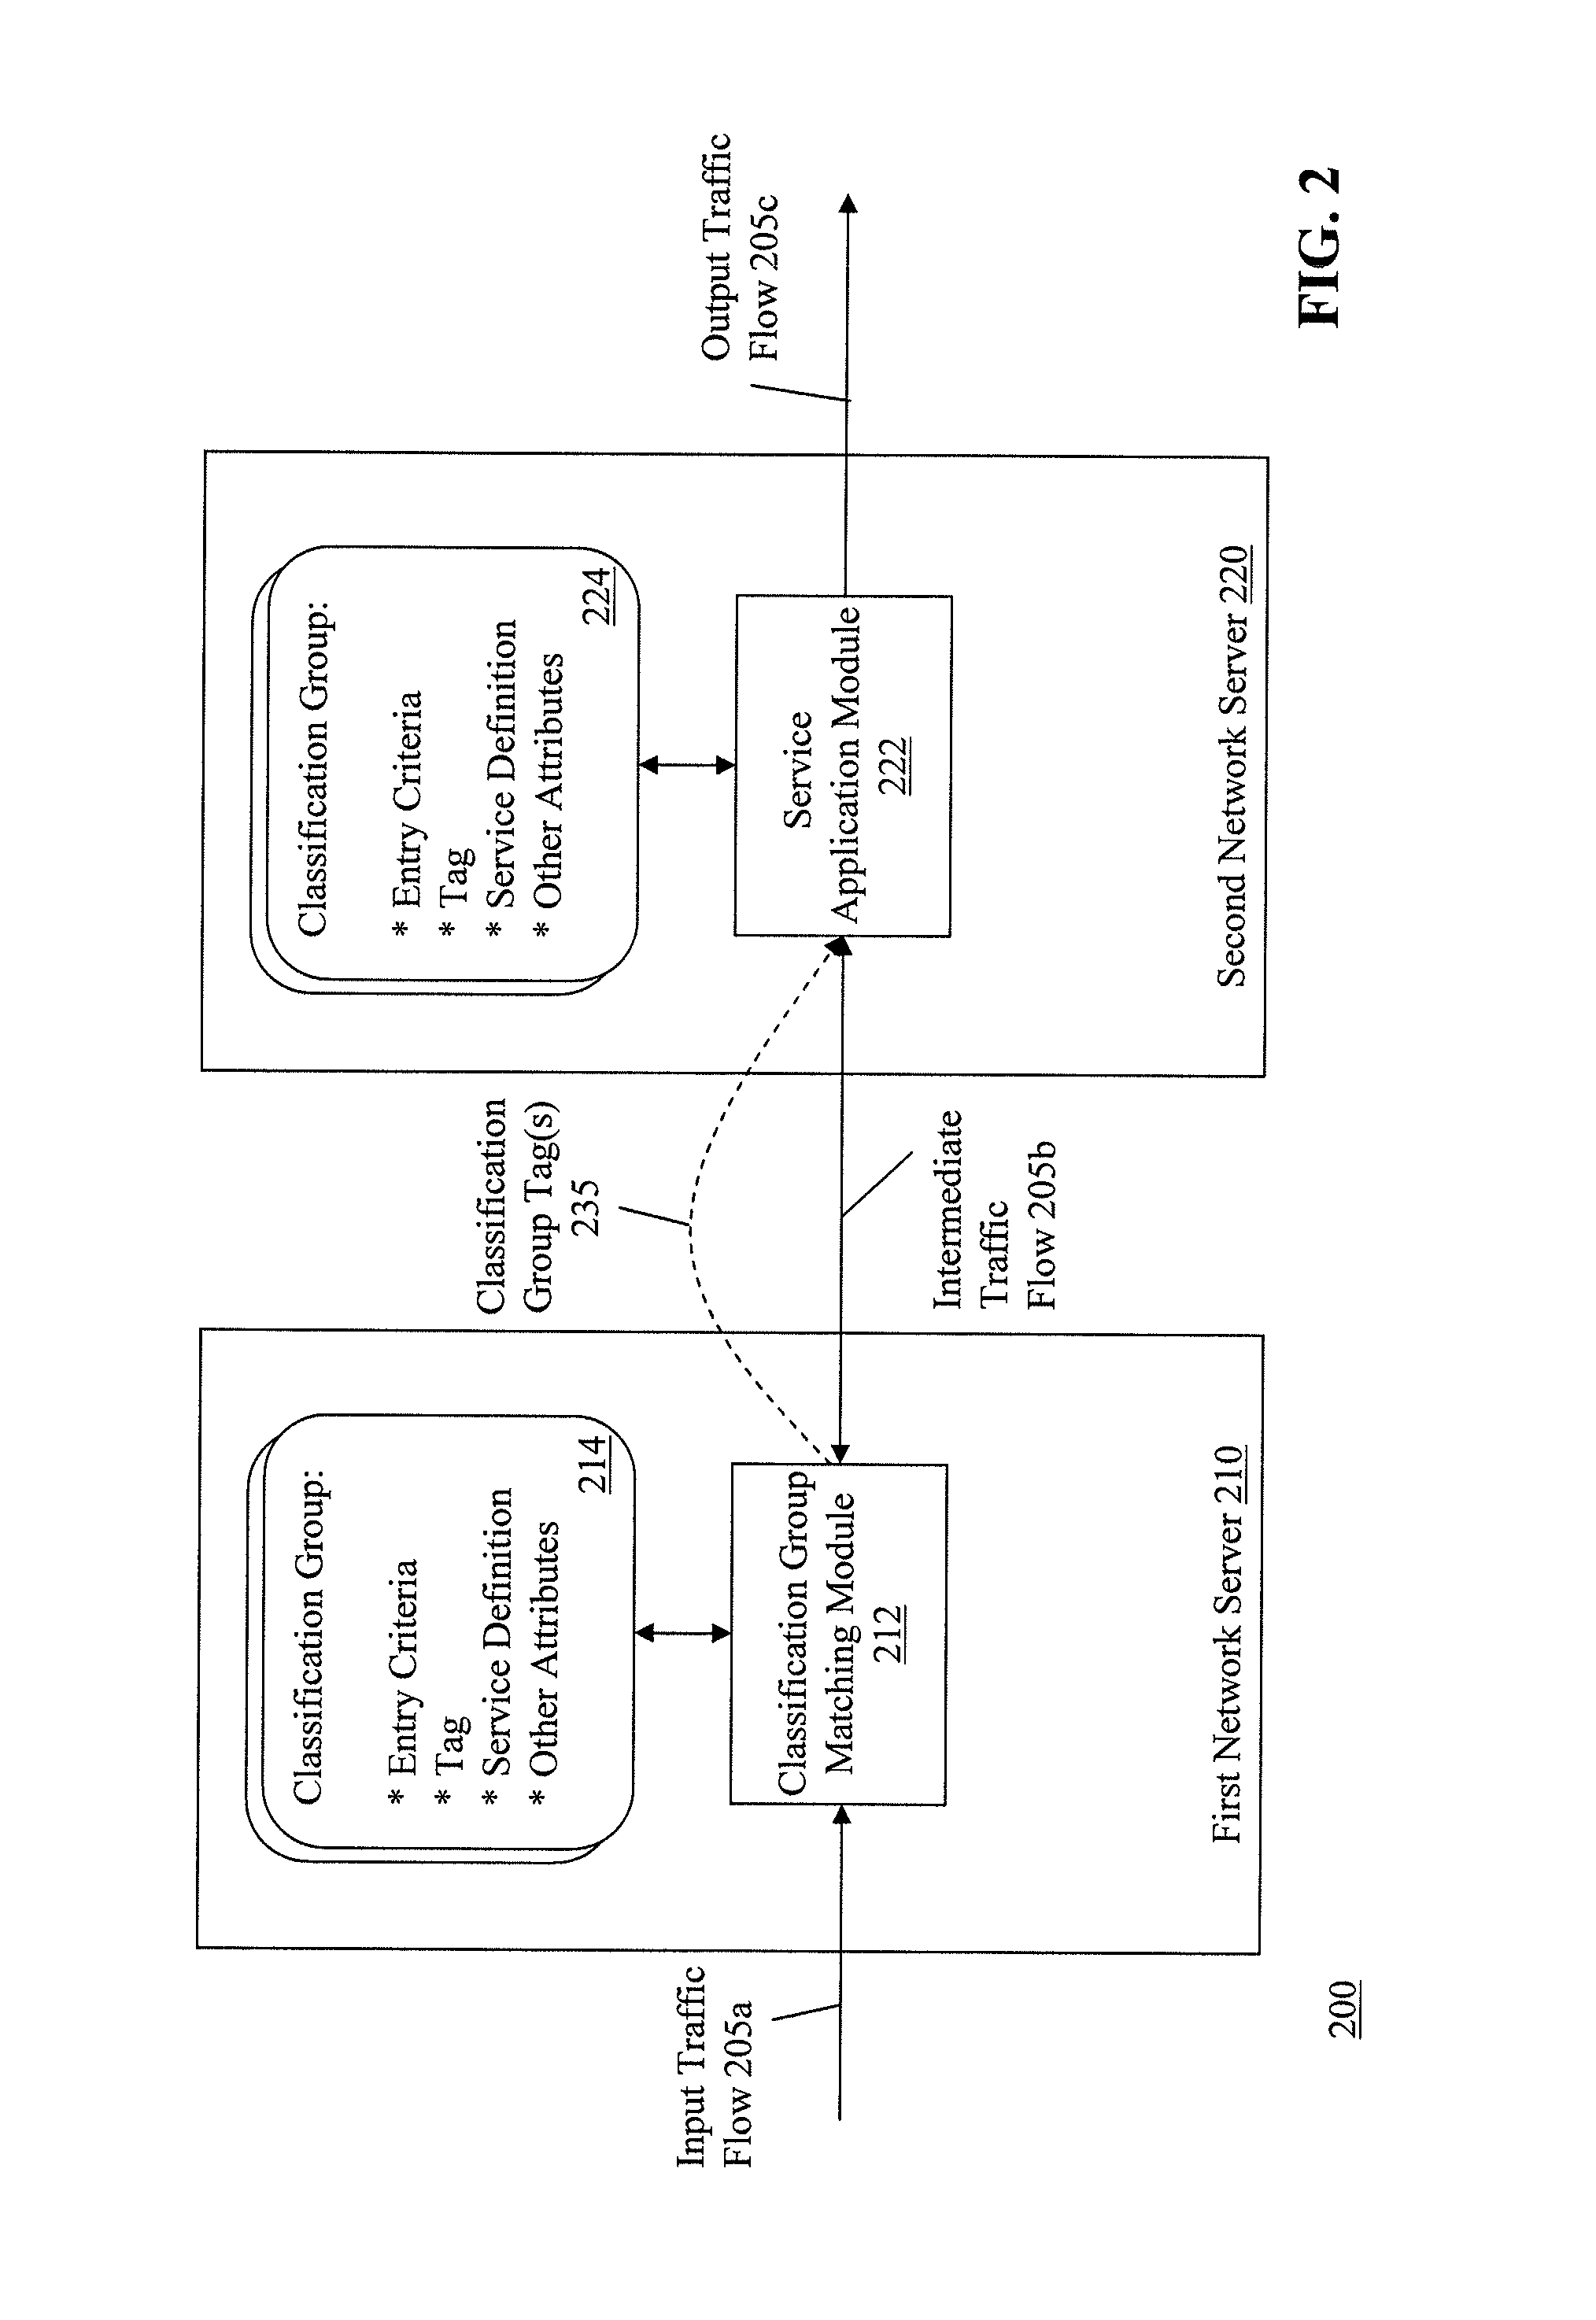 Dynamic classification and grouping of network traffic for service application across multiple nodes